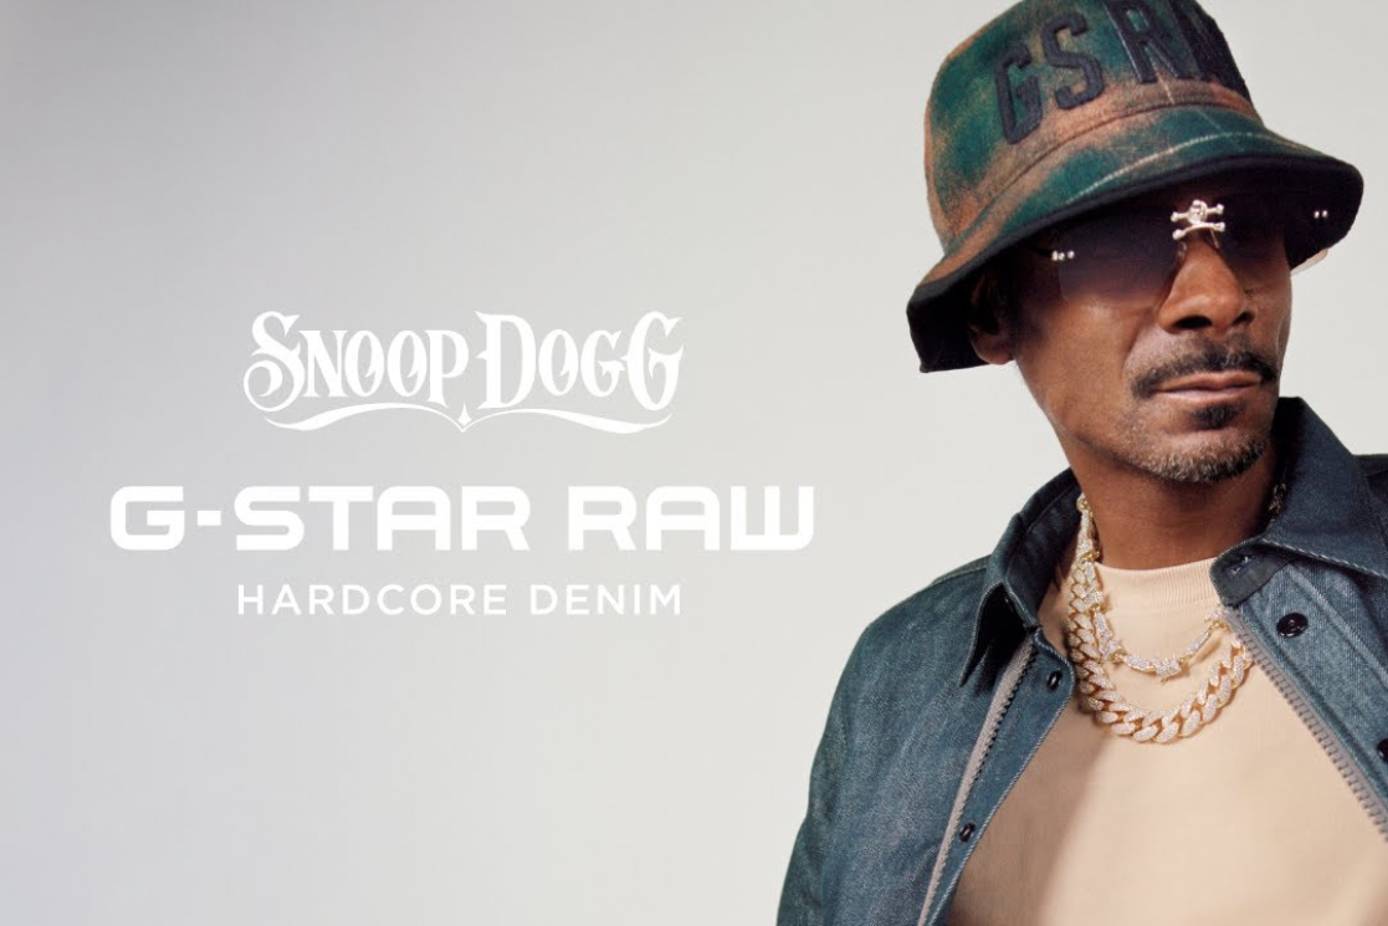 Luxe matchmaker Automatisering Video: G-Star RAW x Snoop Dogg